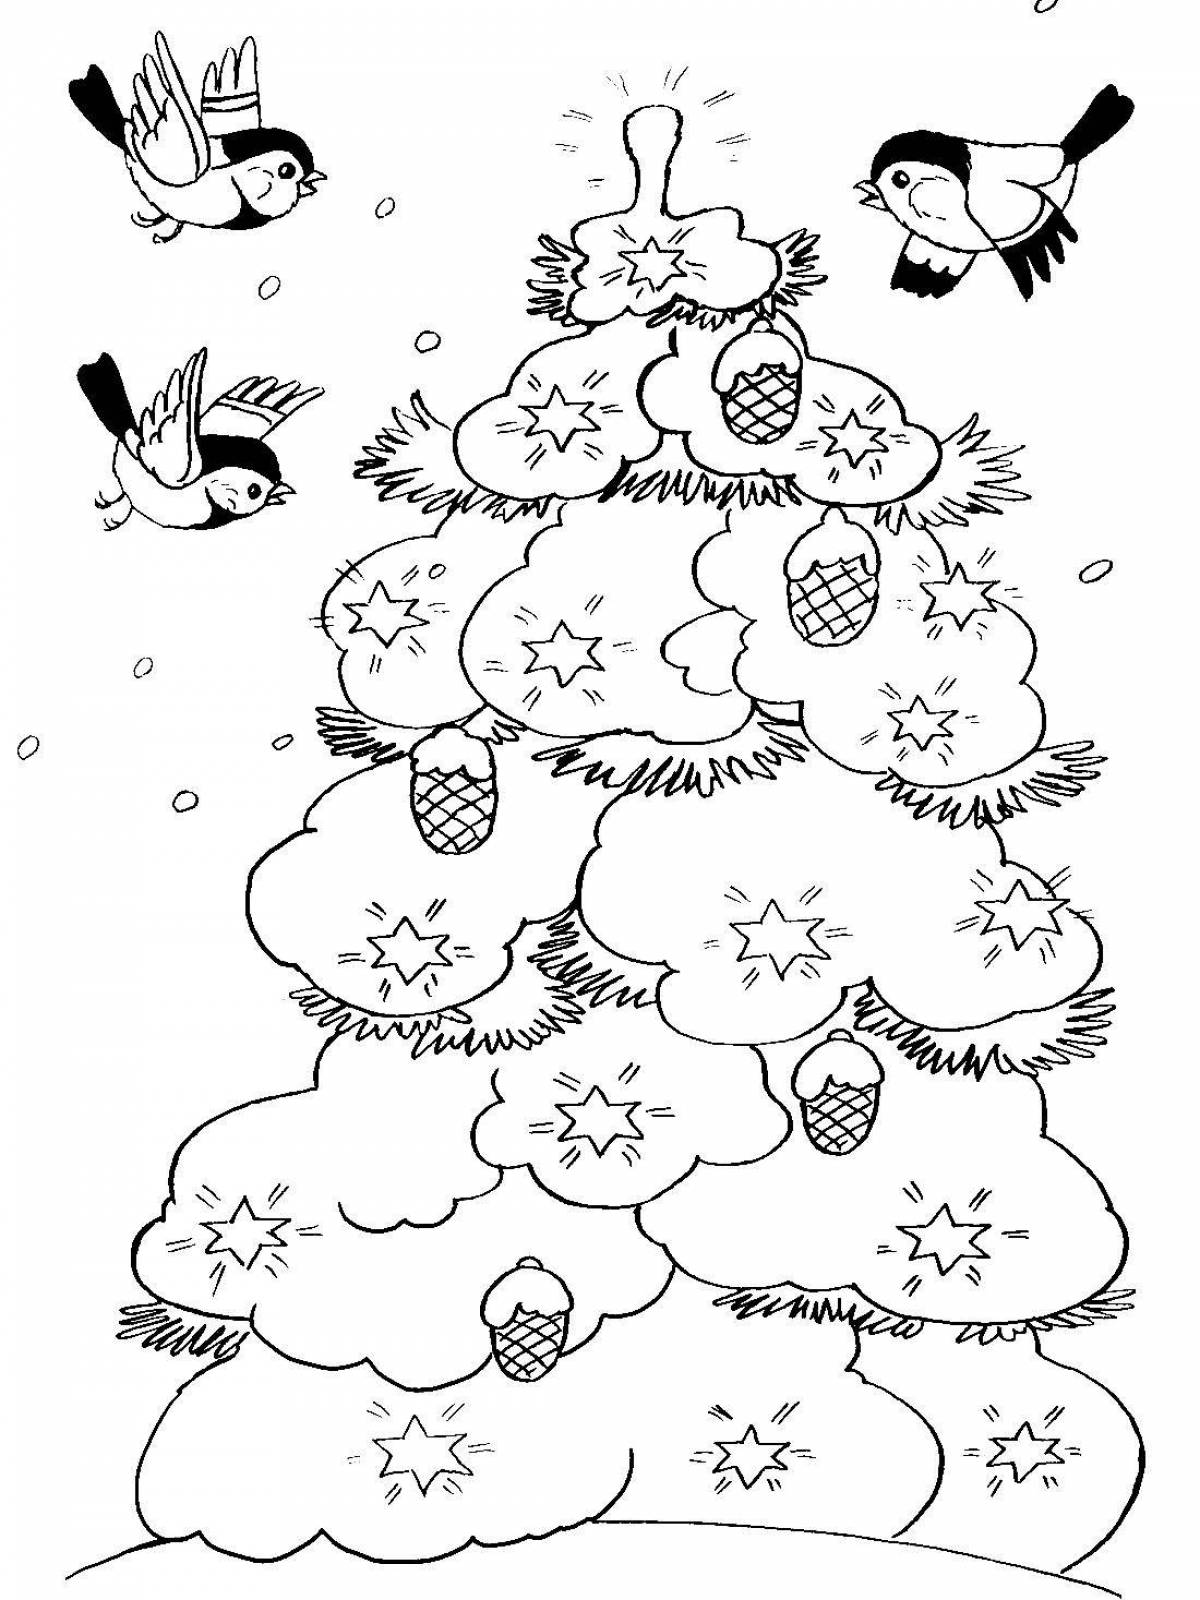 Adorable winter in the forest coloring page